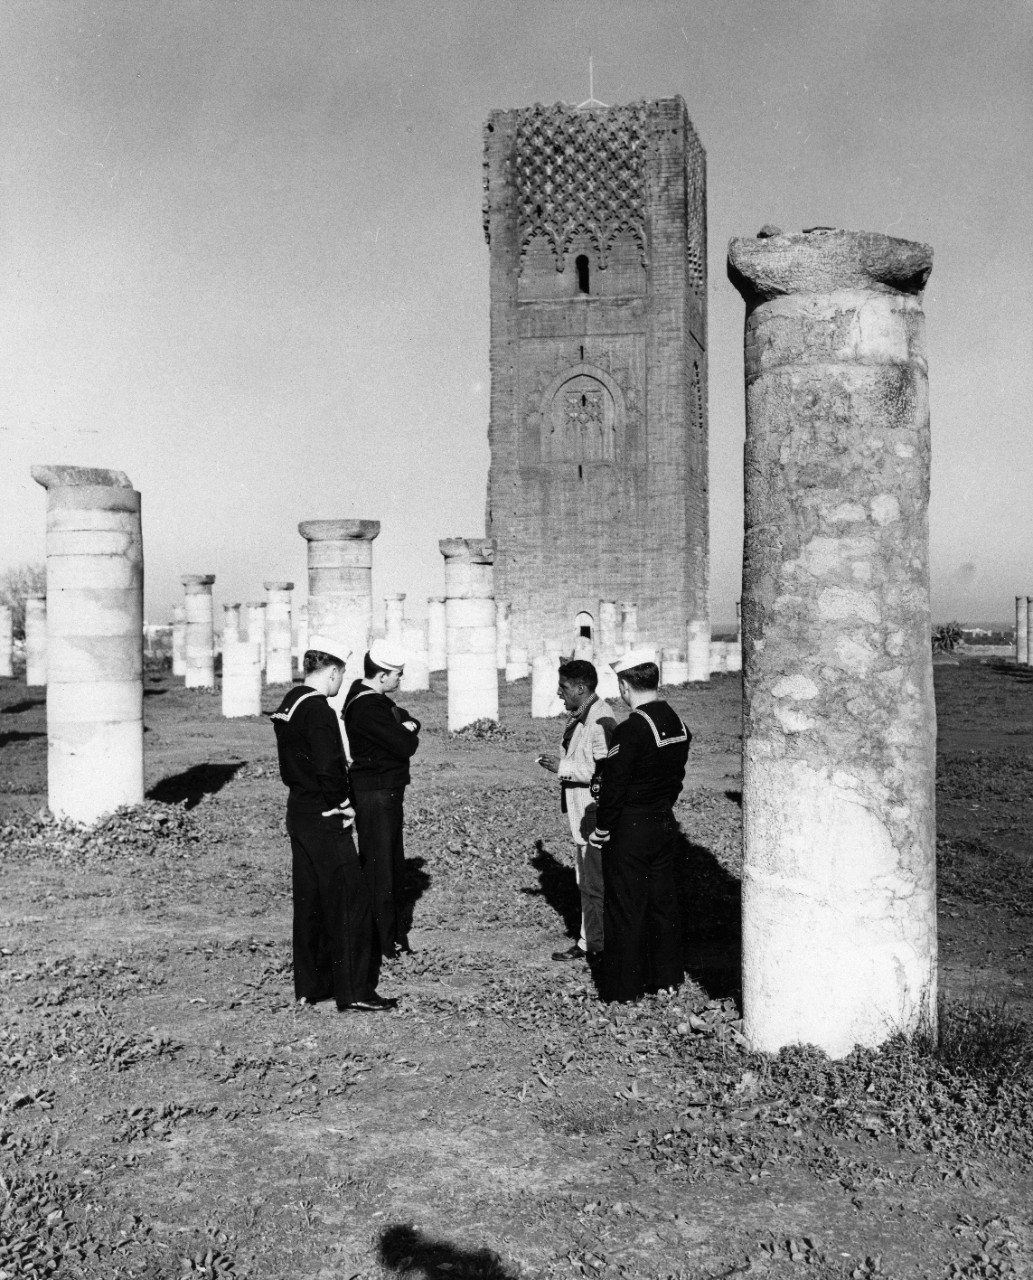 The Hassen Tower (an unfinished church) in Rabat, Morocco is a "must see" tourist attraction, as these VR-22 sailors were told by their guide.